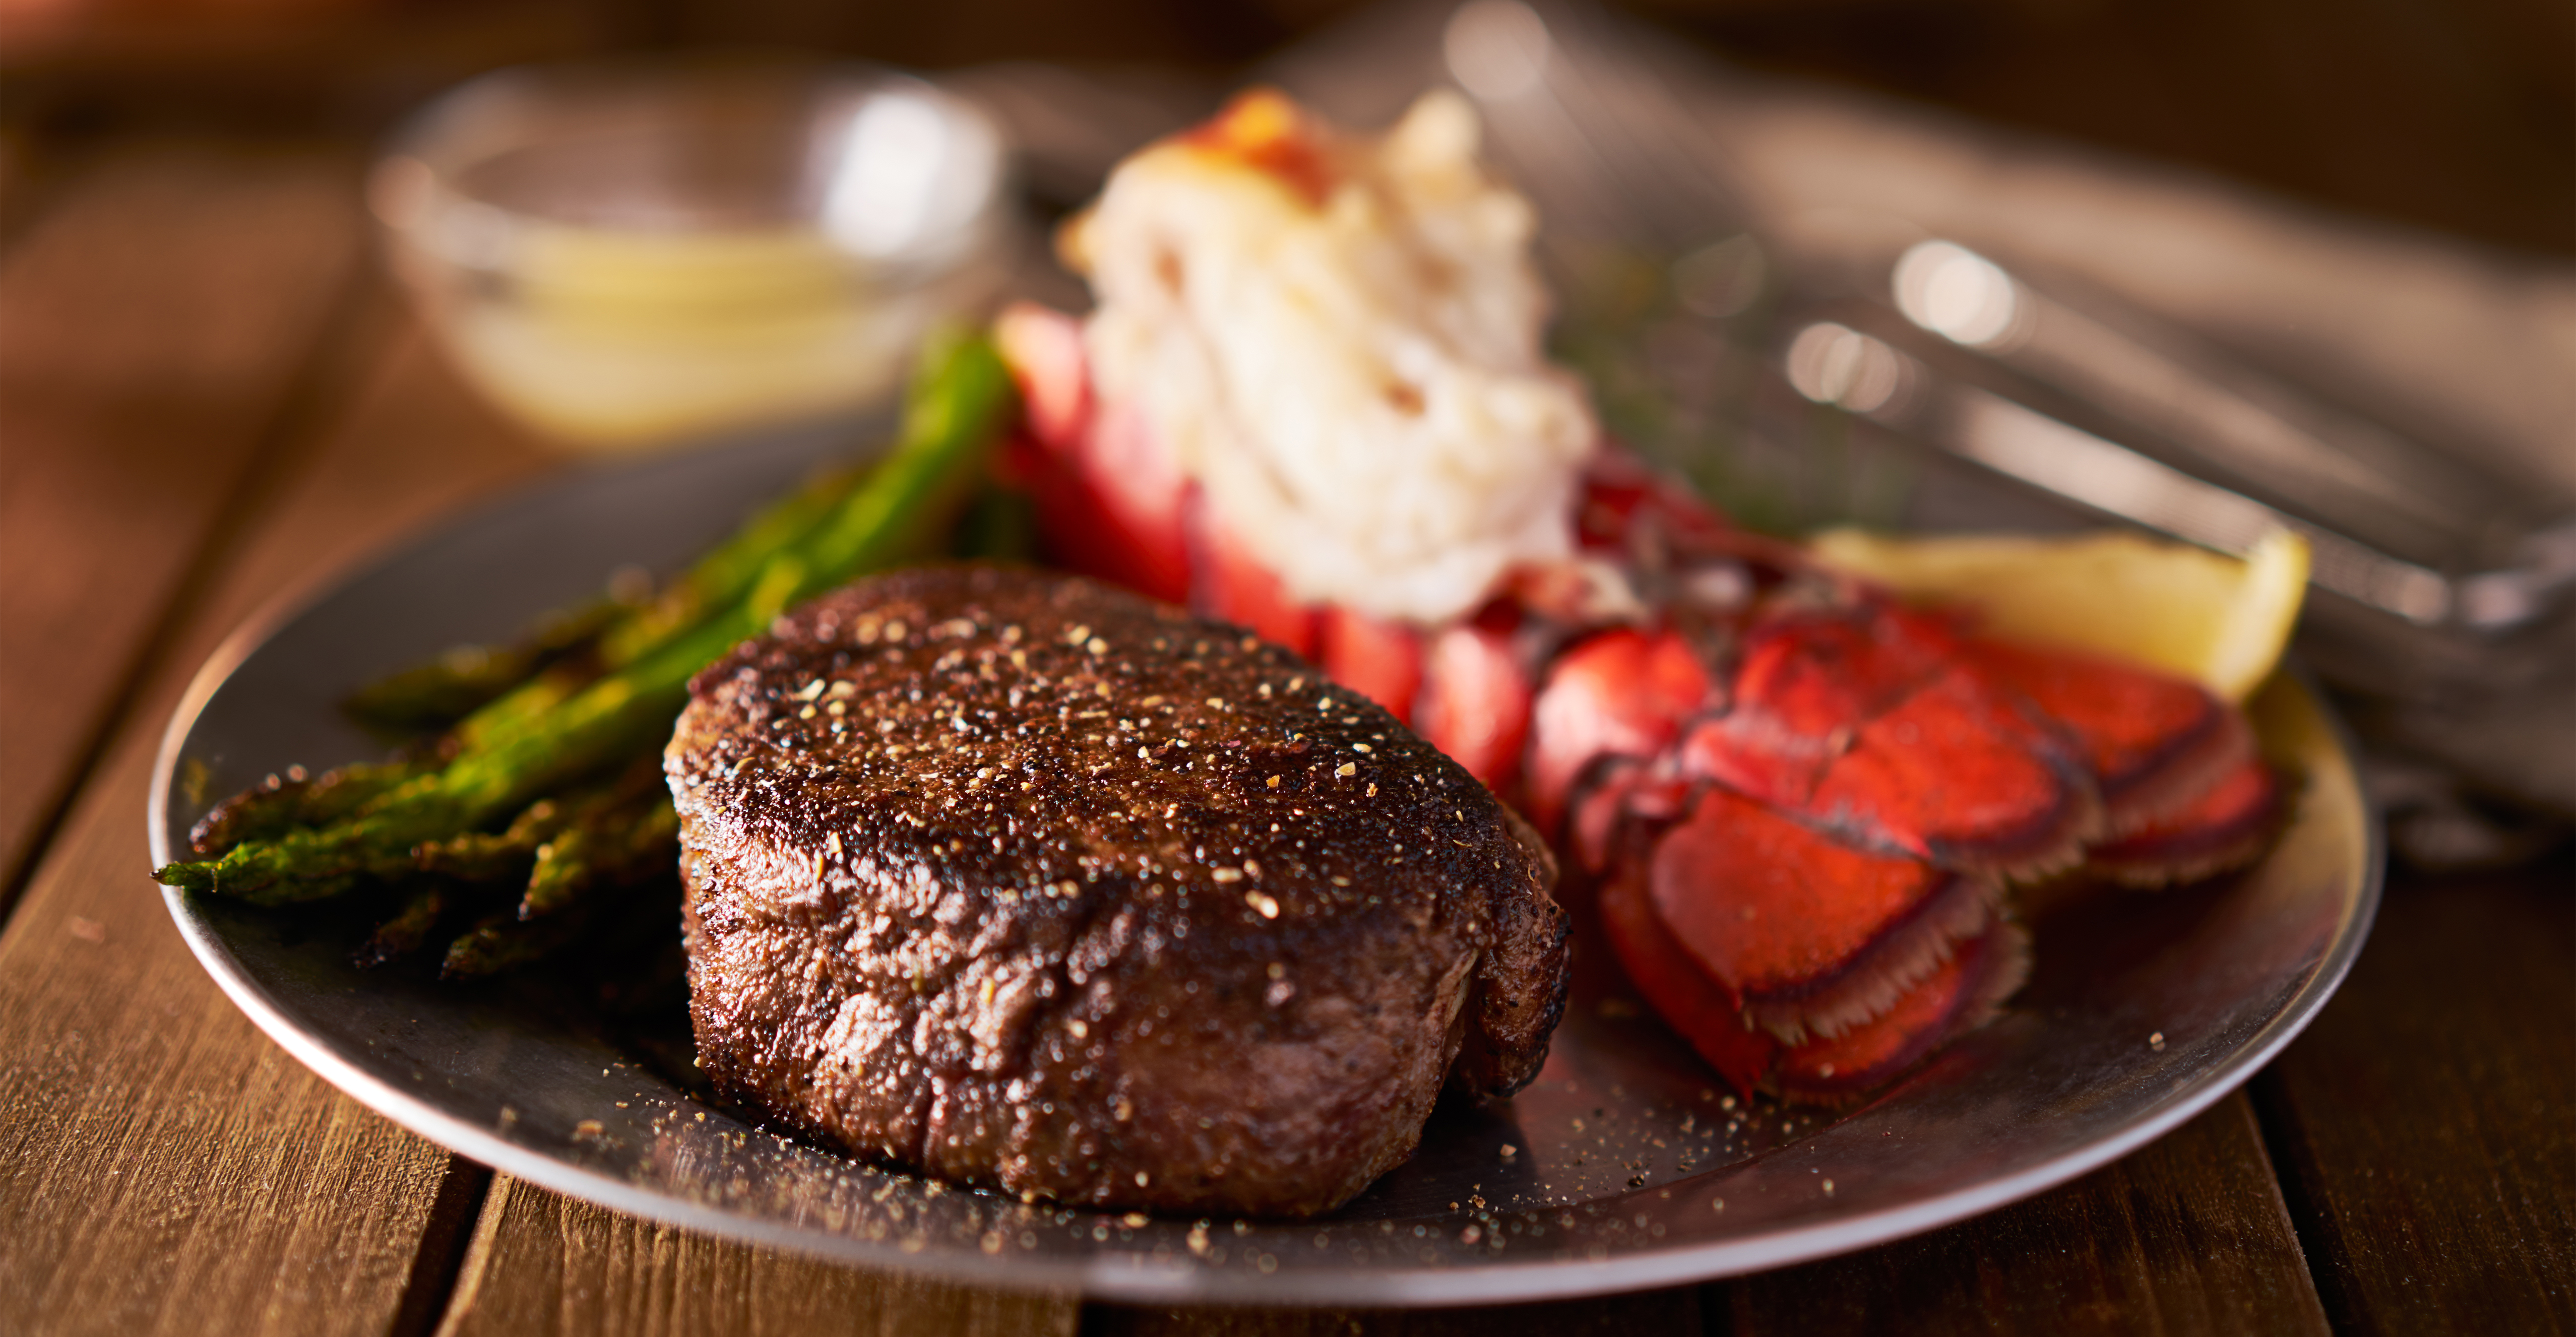 filet mignon steak with lobster tail surf and turf meal